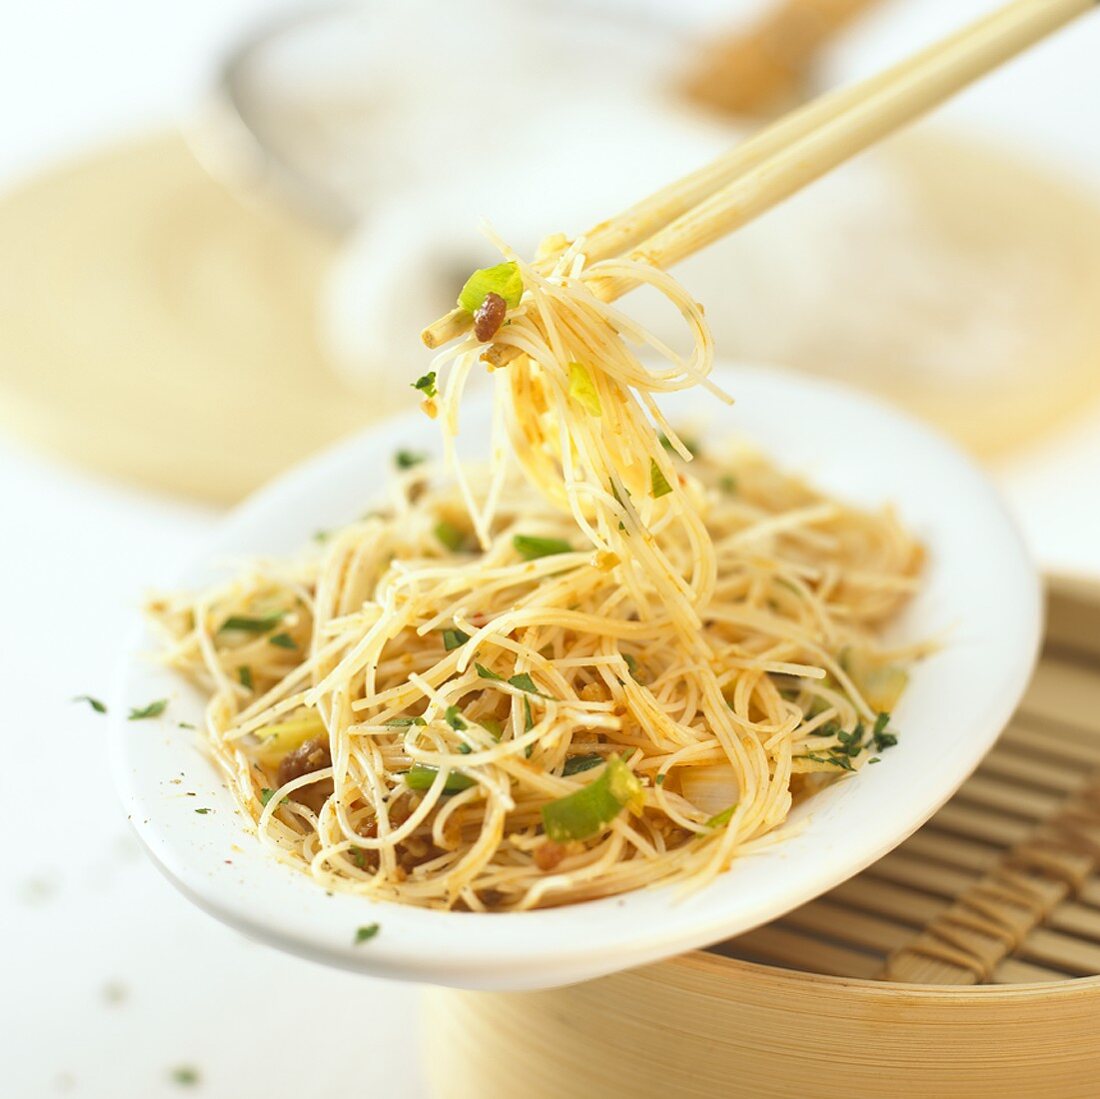 Glass noodles with crabmeat